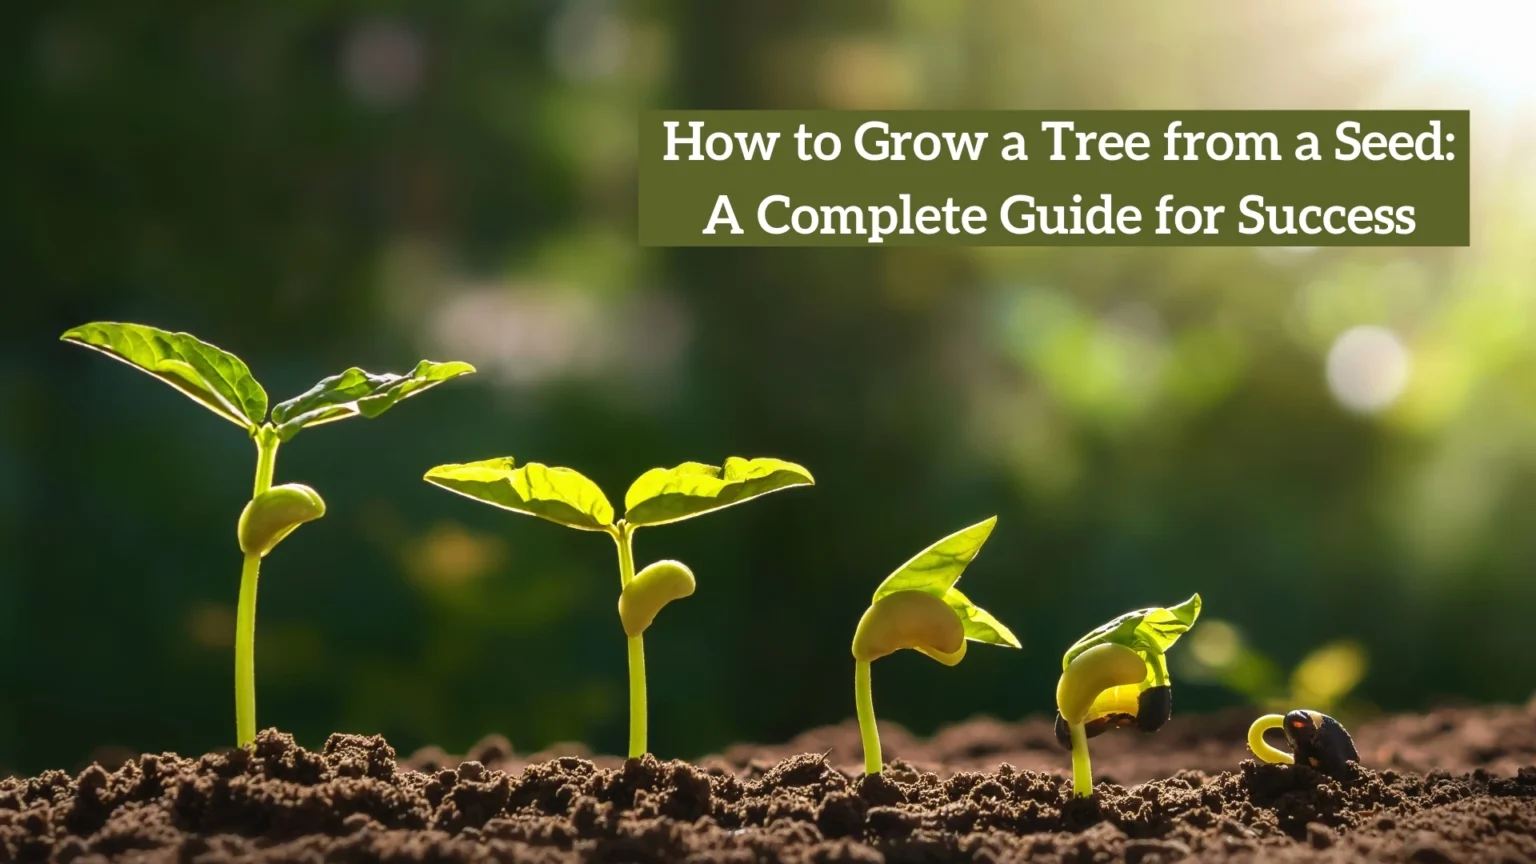 How to Grow a Tree from a Seed: A Complete Guide for Success